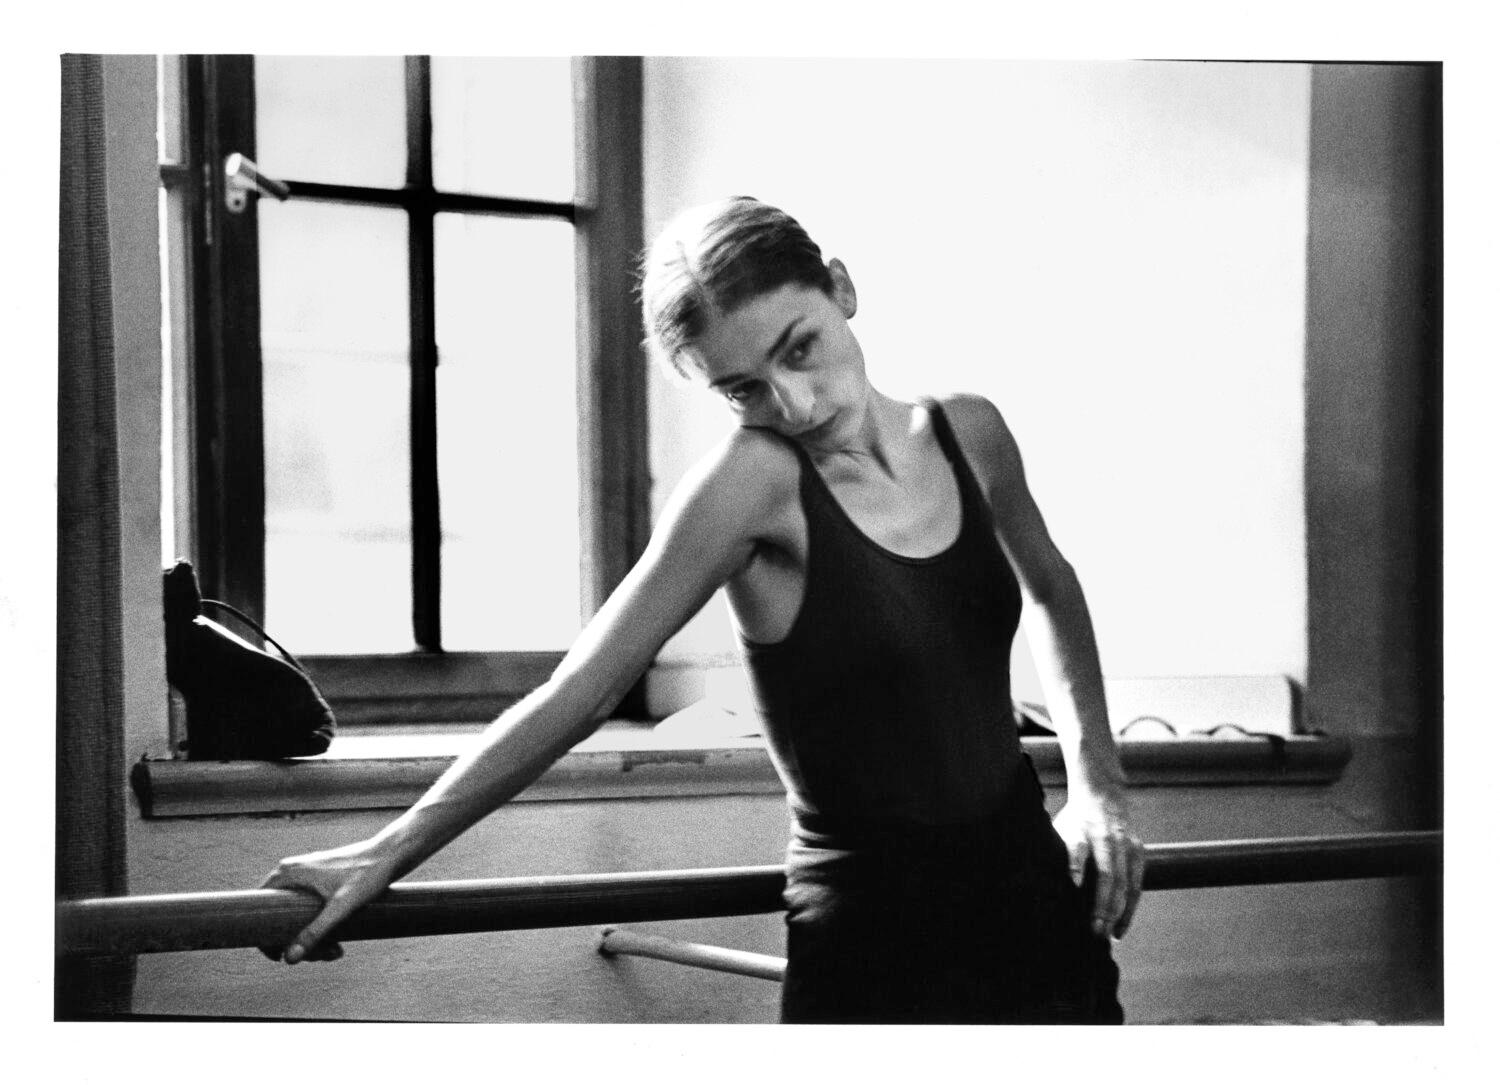 Talking about People through Dance - Pina Bausch Biography